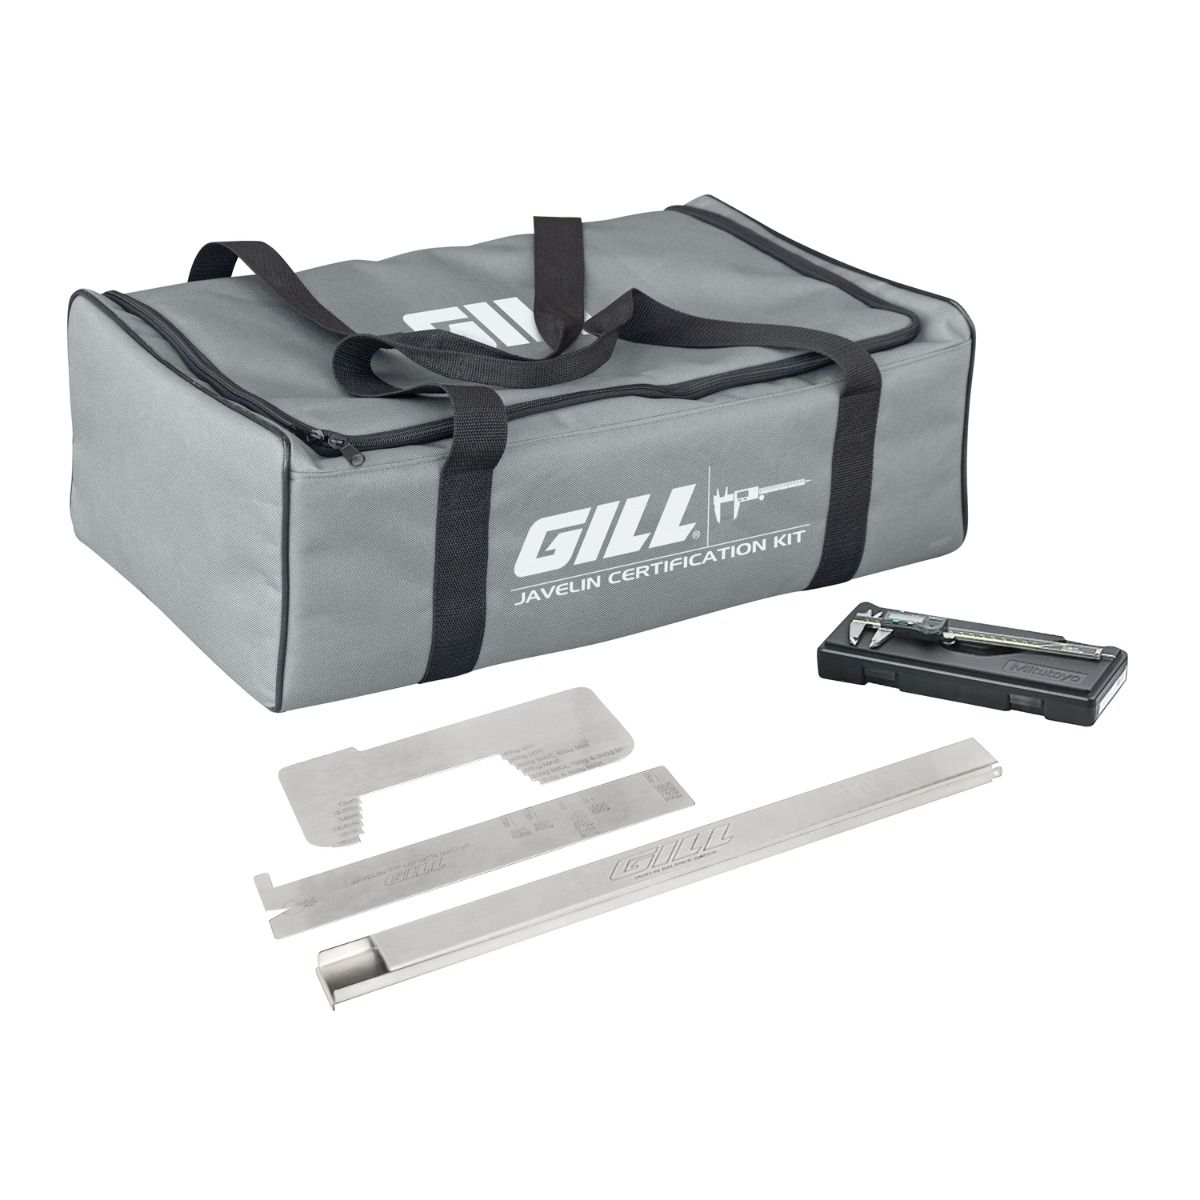 Gill Athletics Implement certification Kits